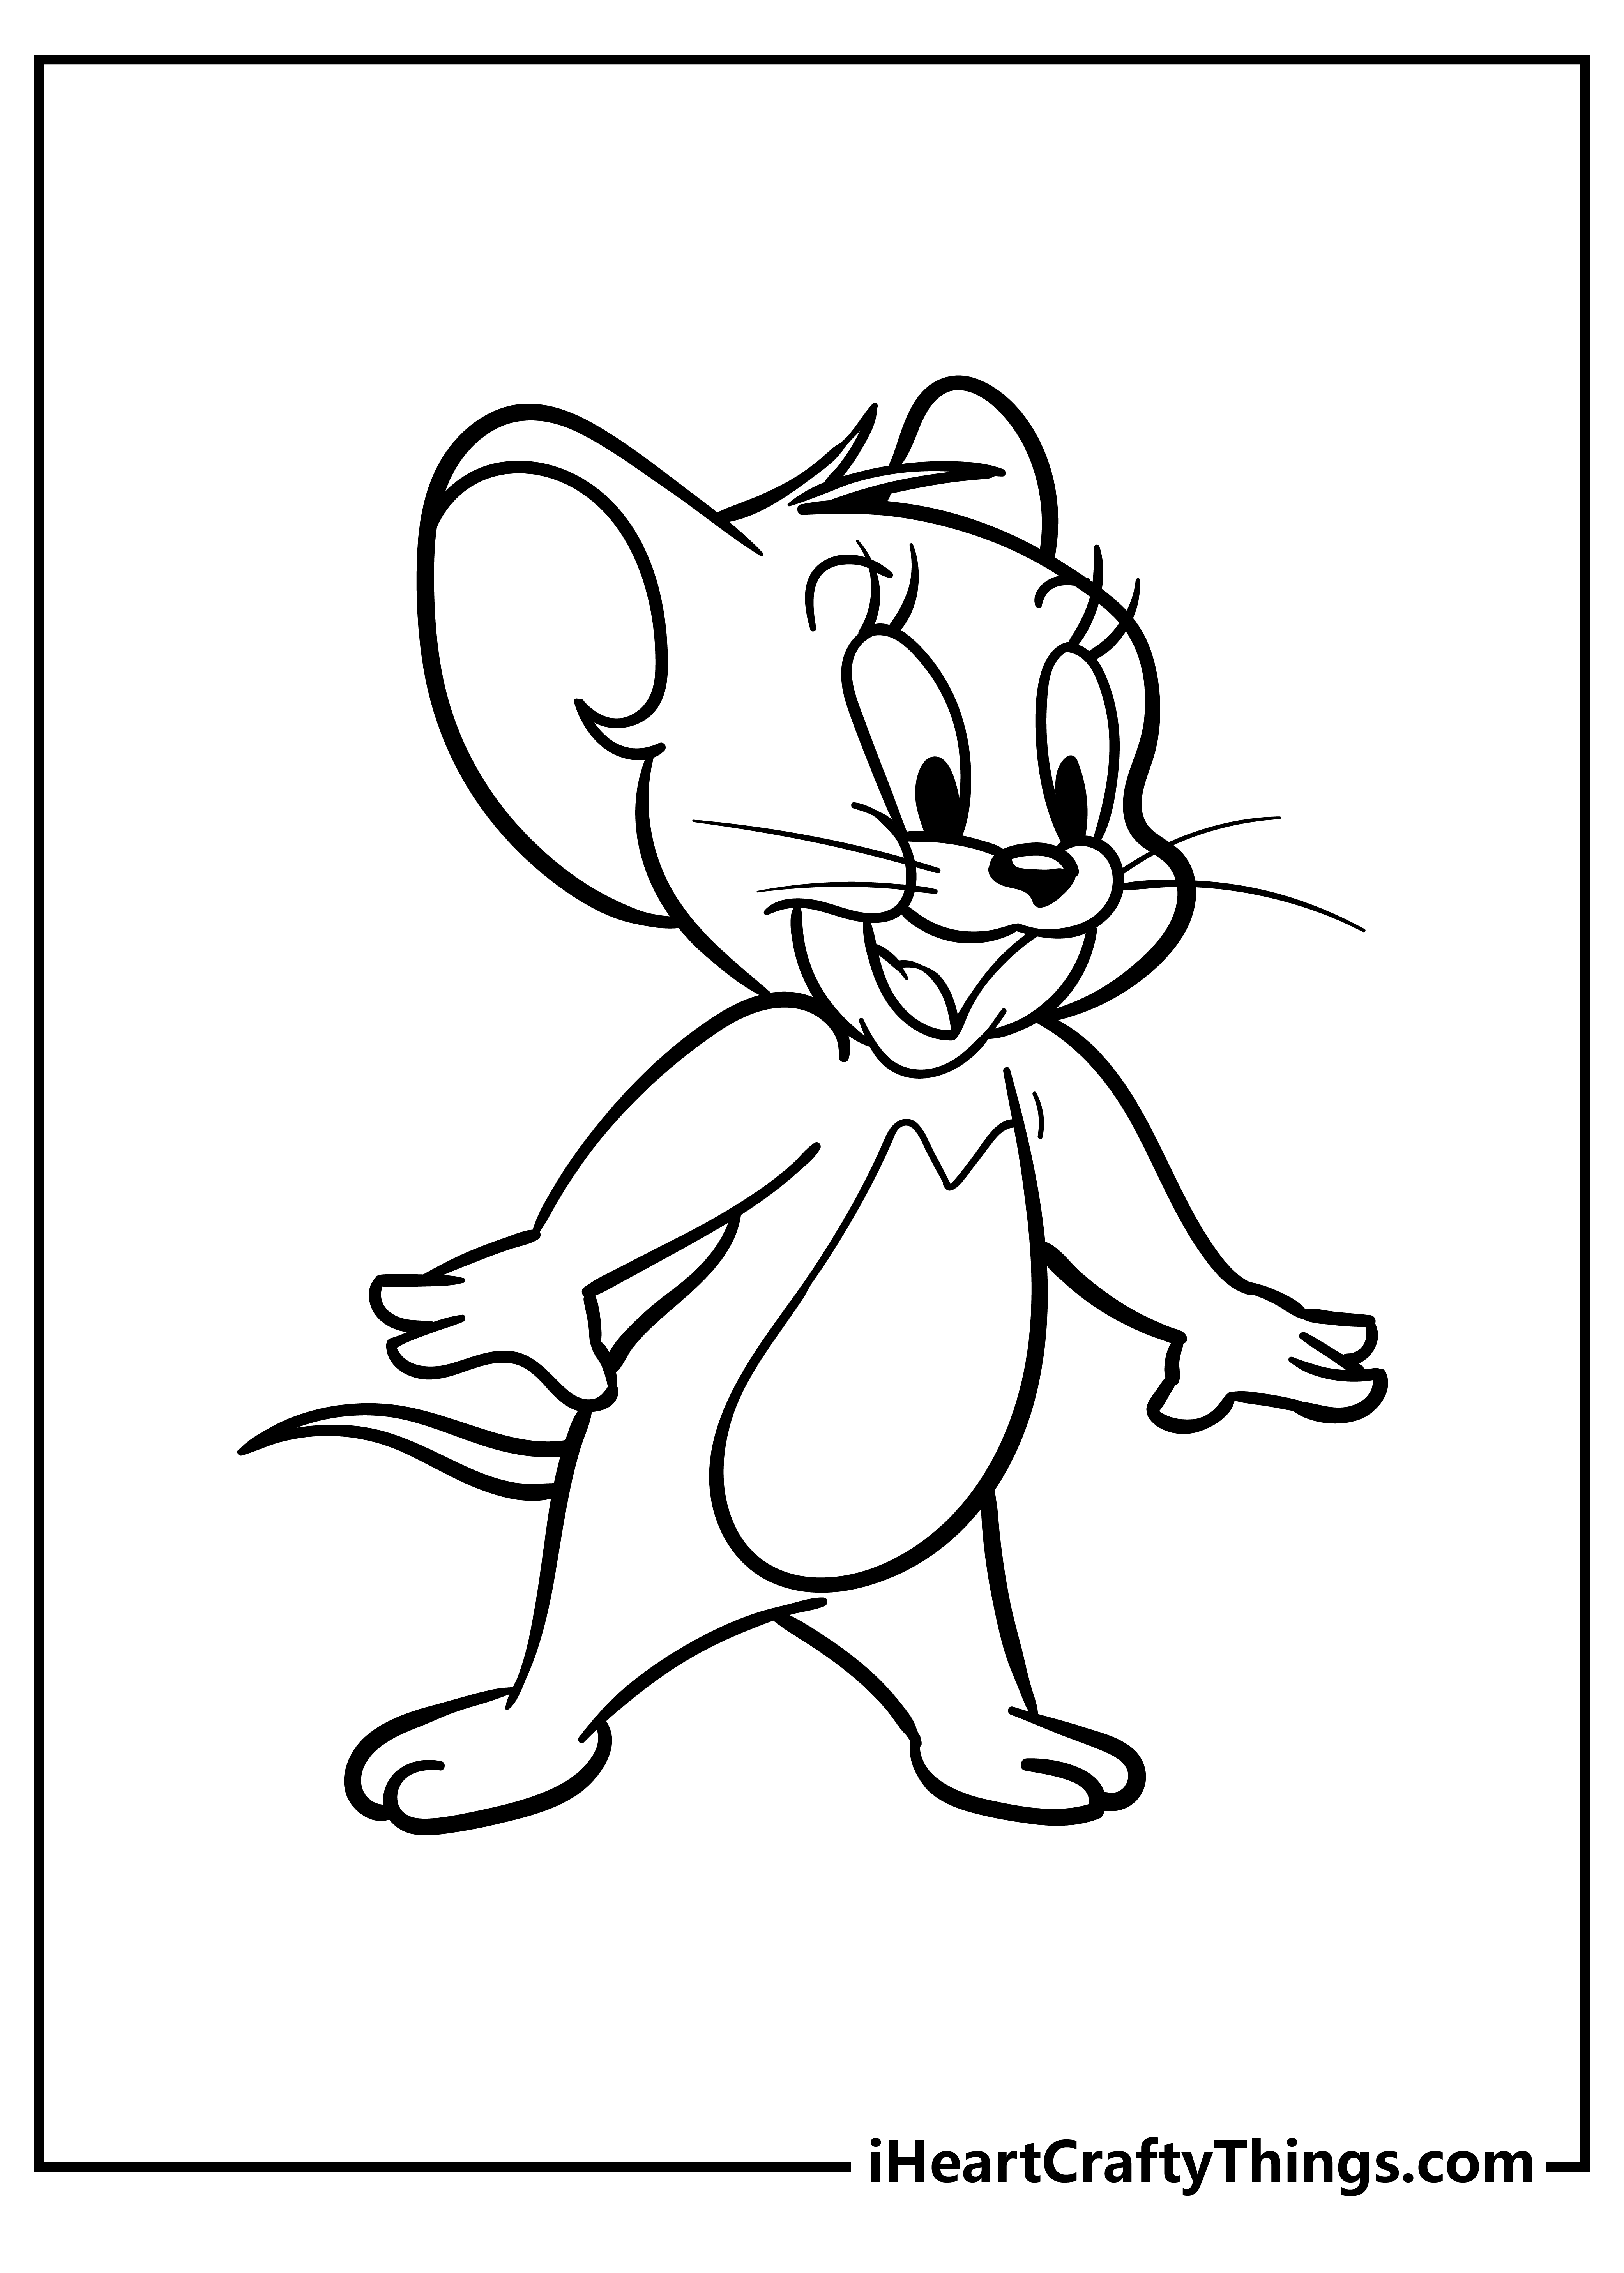 Tom and Jerry Coloring Book for kids free printable